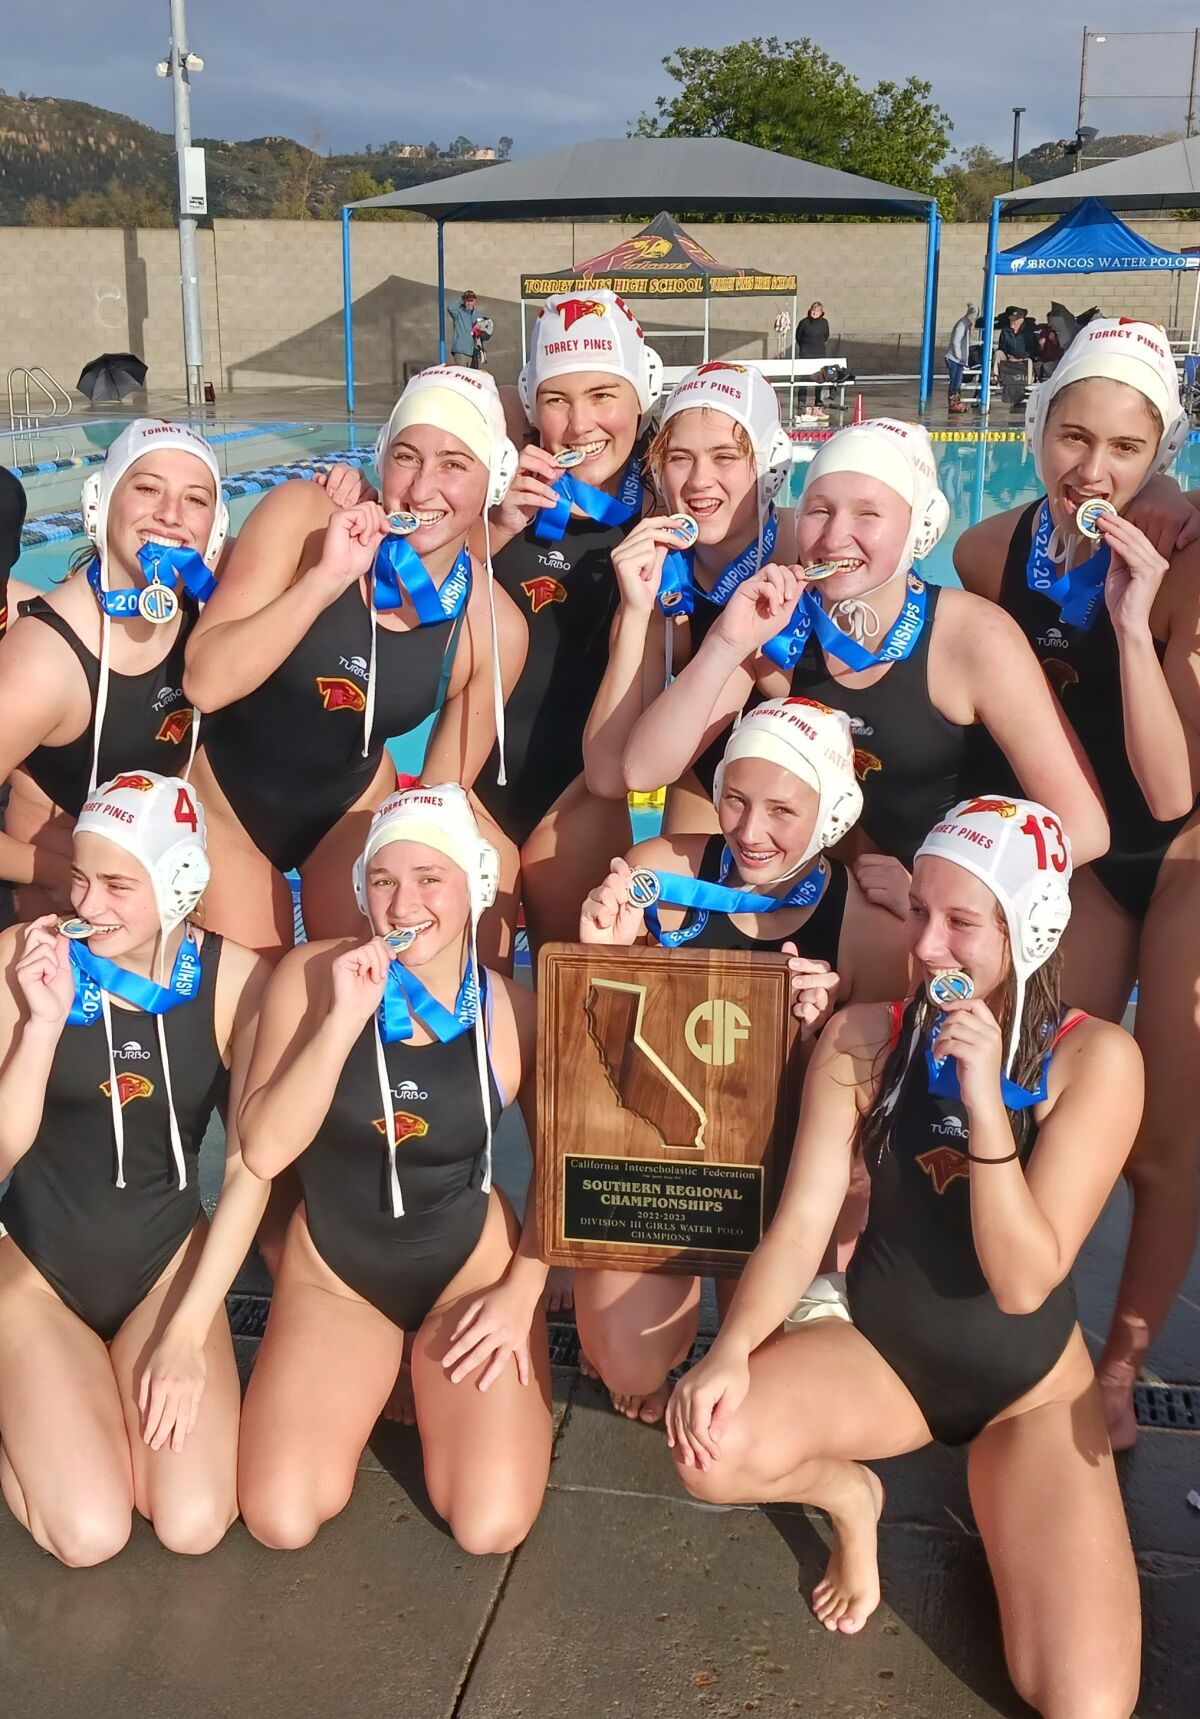 The Torrey Pines girls show off their medals and plaque for winning the Southern California Regional Division III crown.